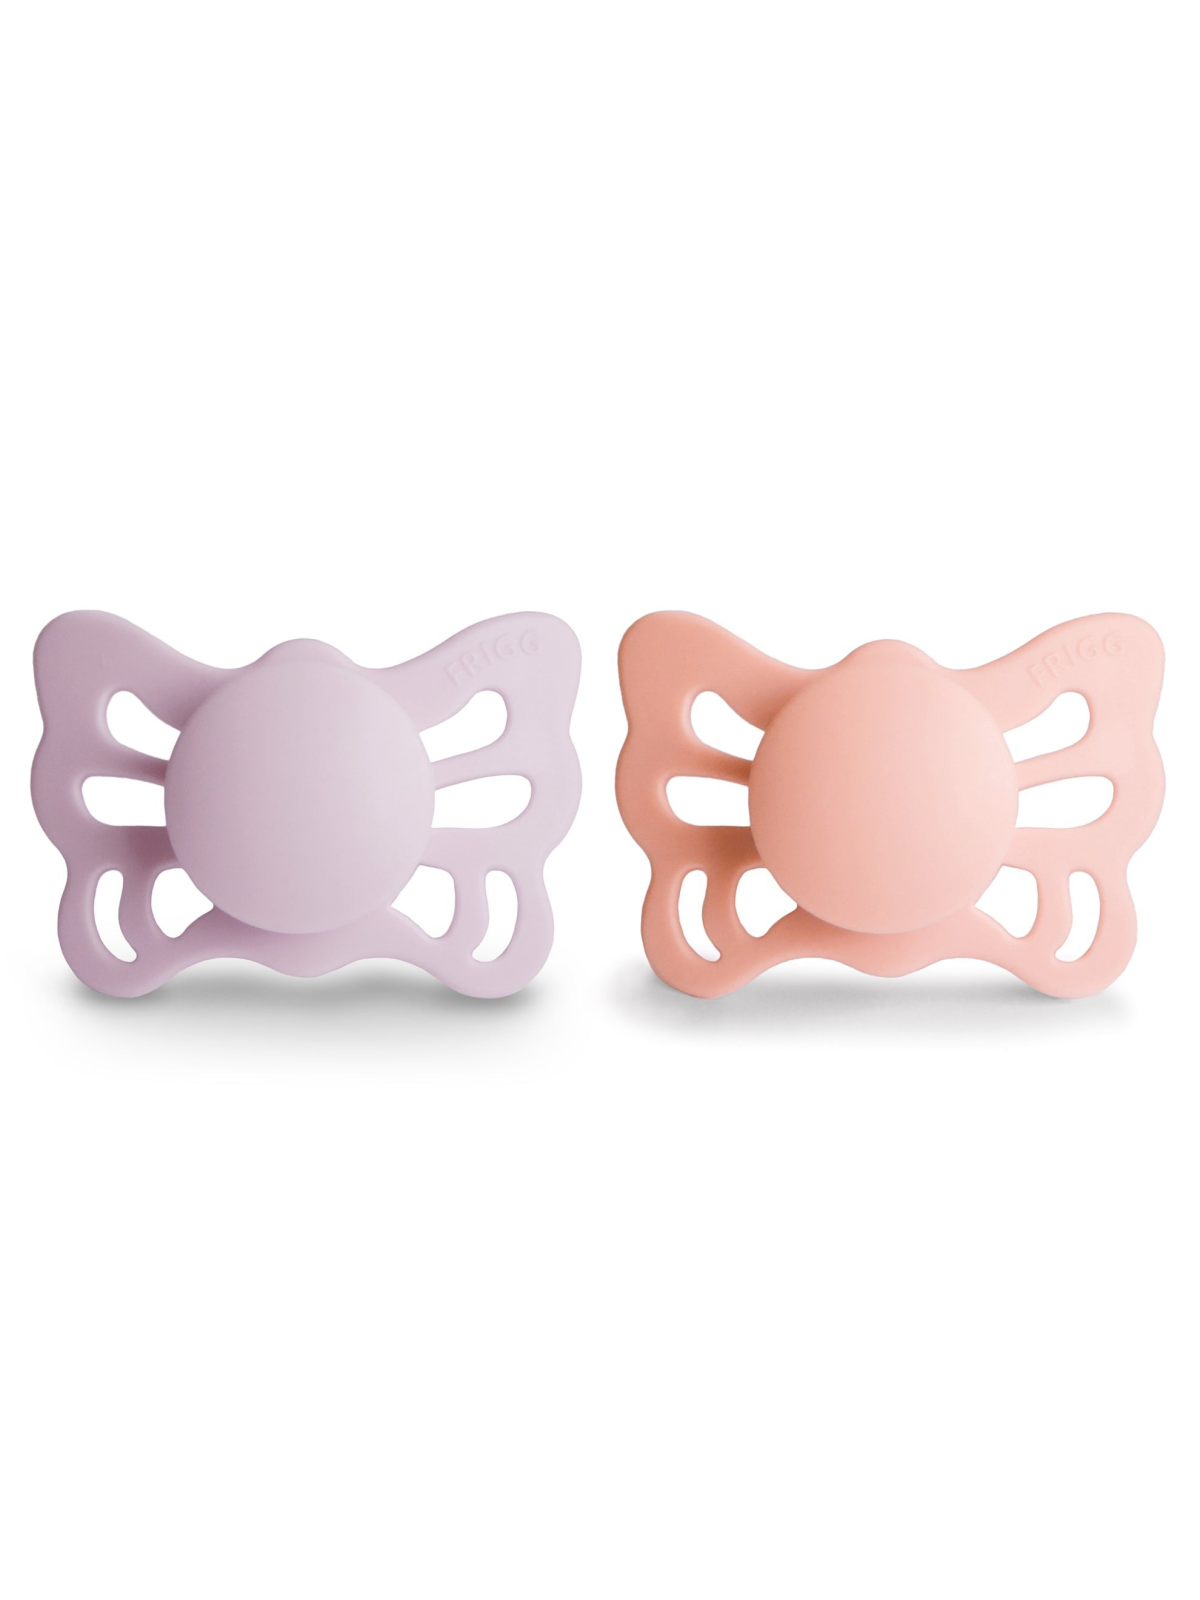 2-Pack Butterfly Anatomical Silicone Pacifiers, Soft Lilac/Pretty in in Peach (0-6 months)